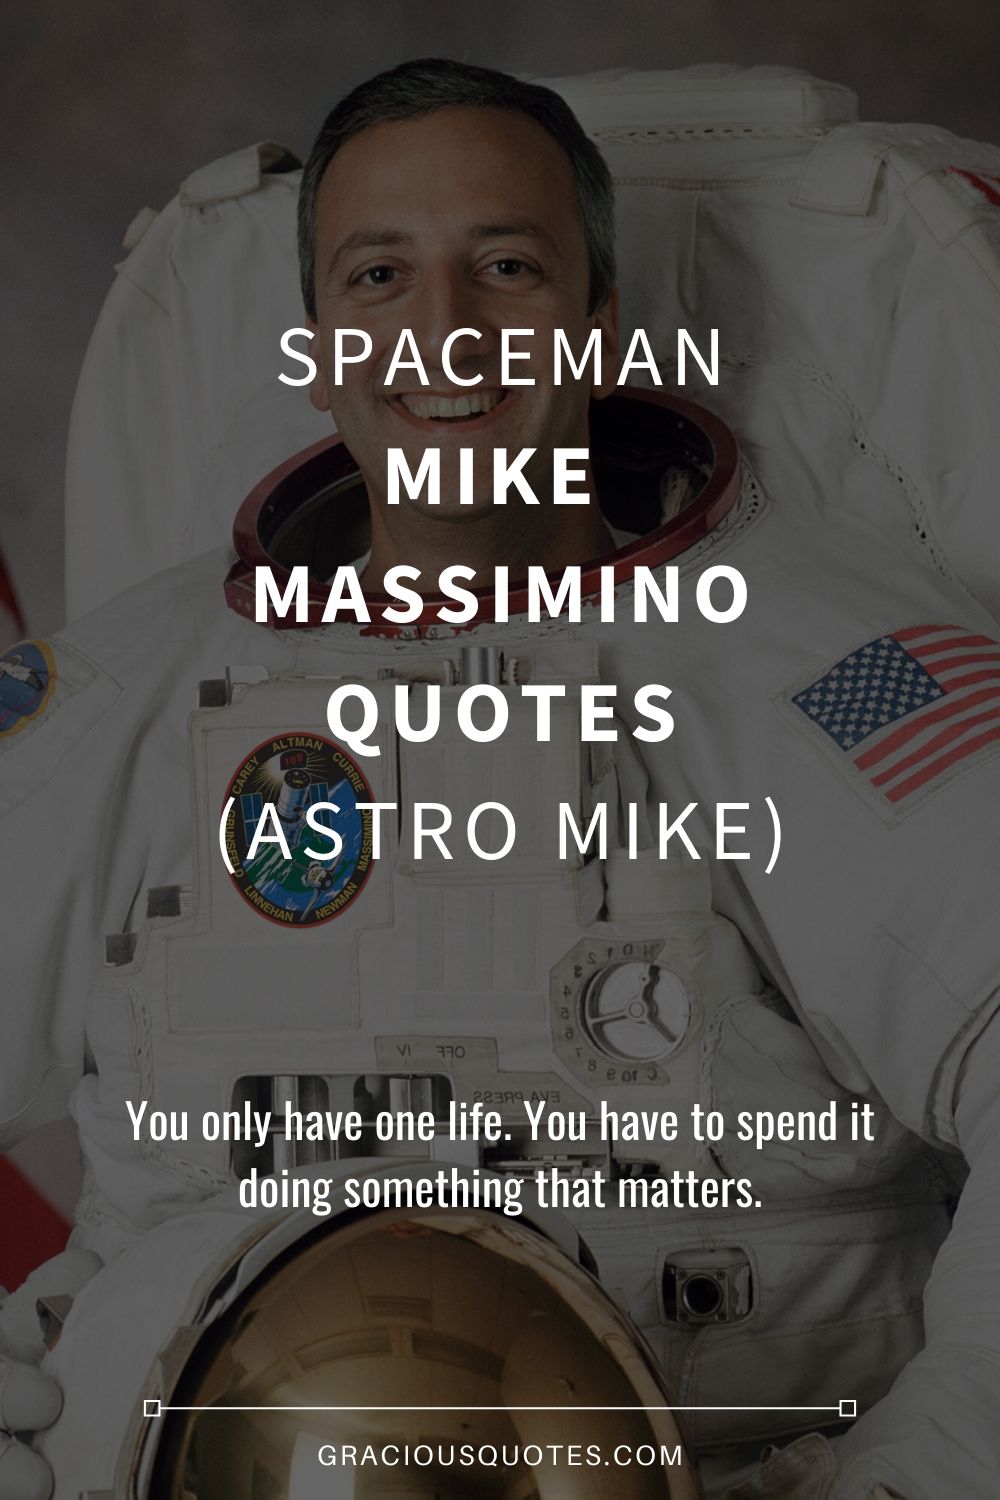 Spaceman Mike Massimino Quotes (ASTRO MIKE) - Gracious Quotes